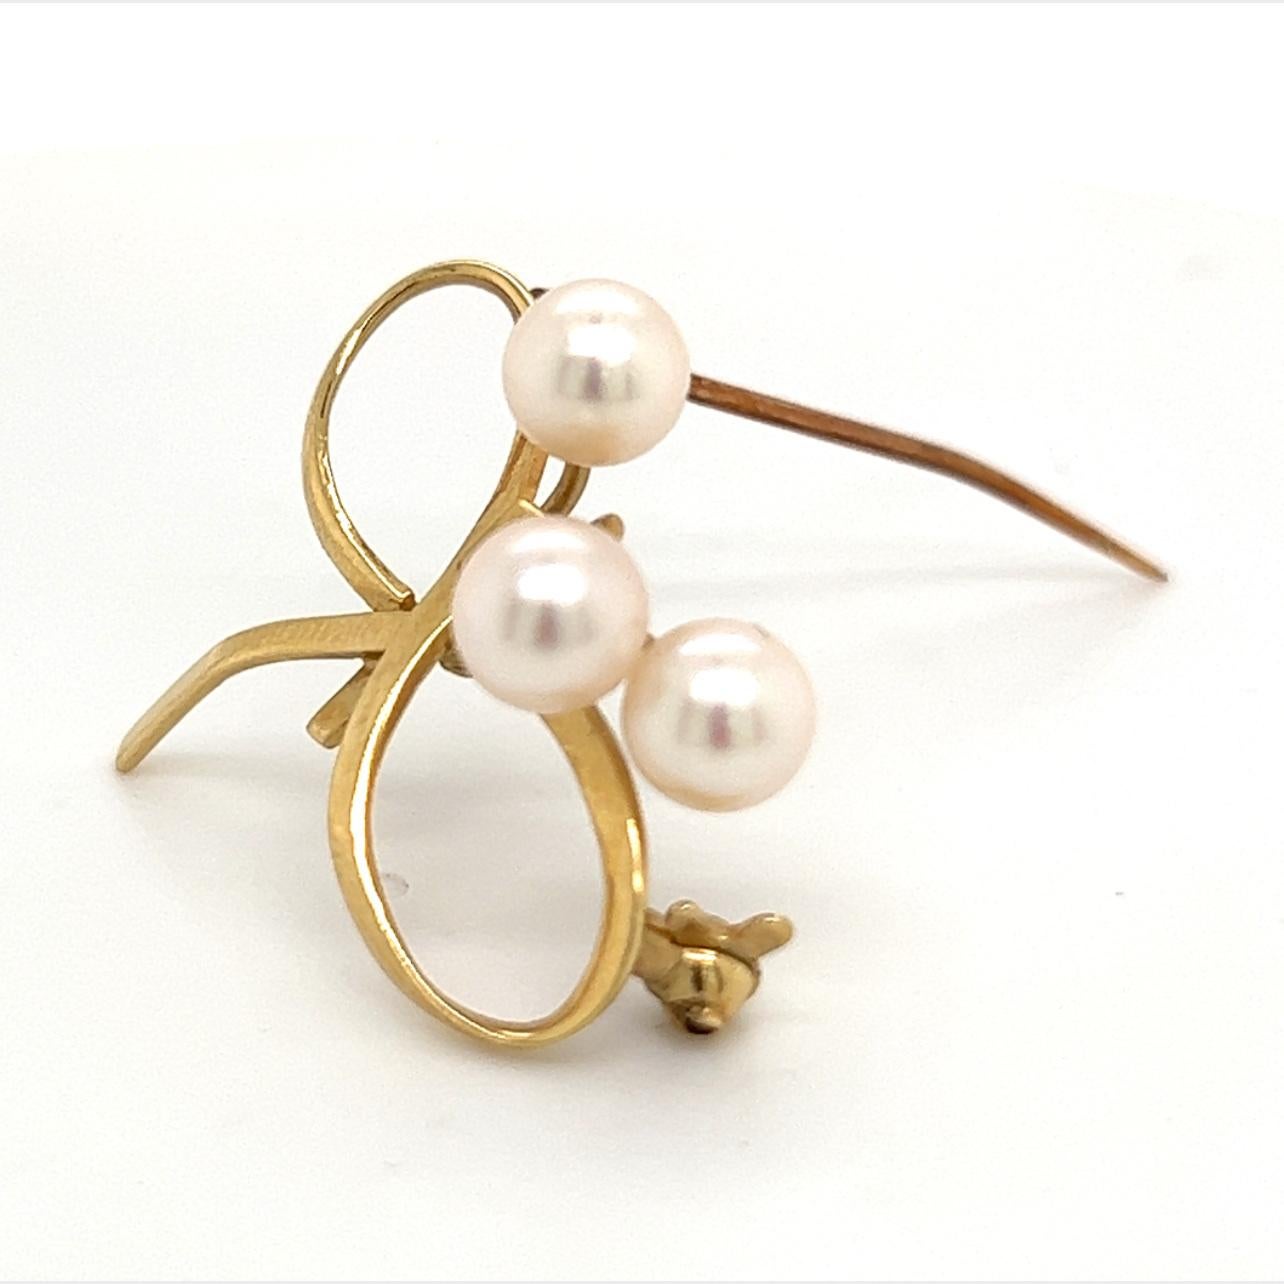 Mikimoto Estate Akoya Pearl Brooch Pin 14k Gold 6 mm M273

This elegant Authentic Mikimoto 14k Gold brooch has 3 Saltwater Akoya Cultured Pearls ranging in size from 5.80 mm.

TRUSTED SELLER SINCE 2002

PLEASE SEE OUR HUNDREDS OF POSITIVE FEEDBACKS